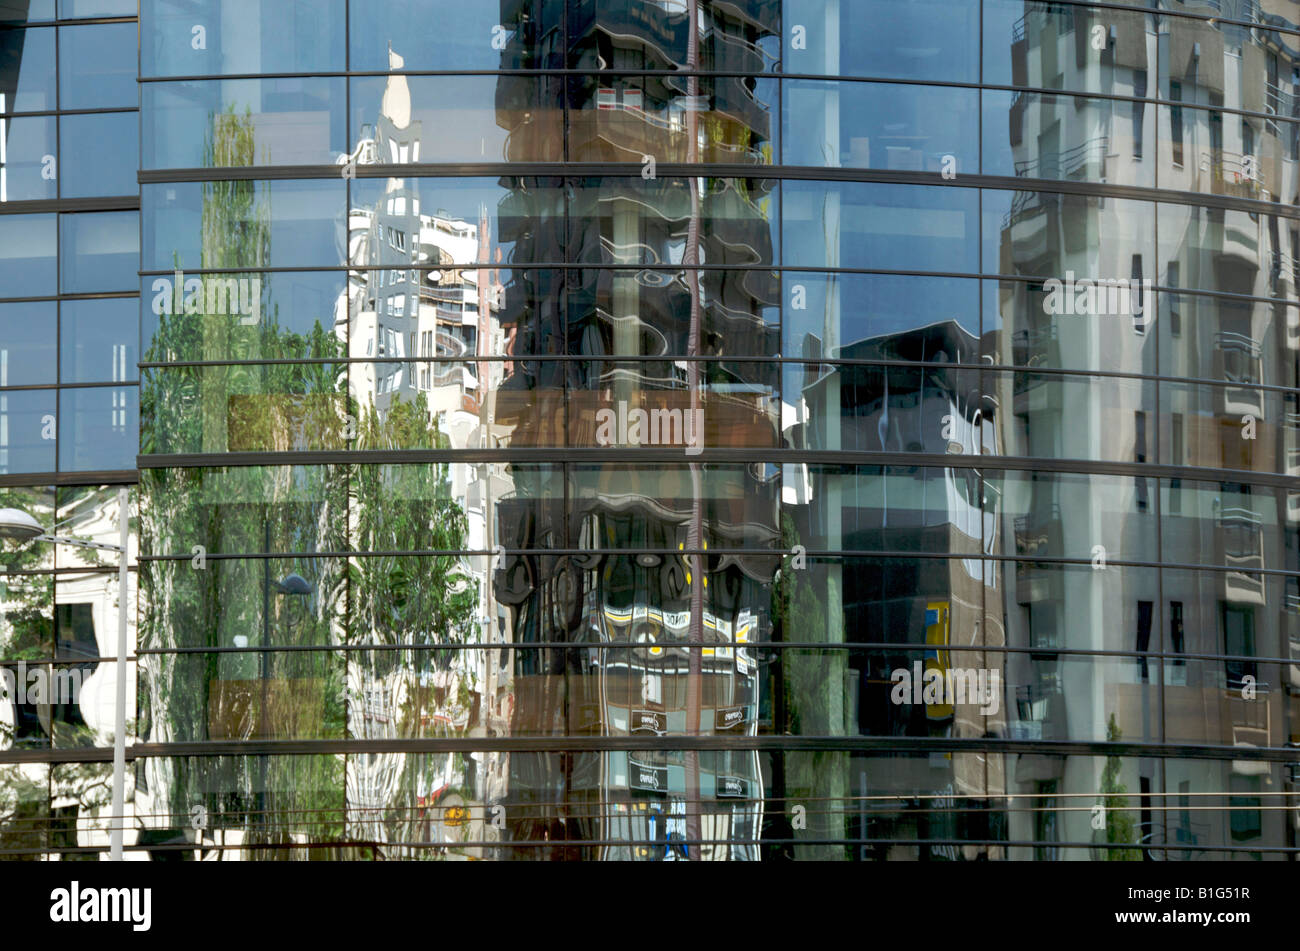 Reflections in office building windows in a city centre Stock Photo